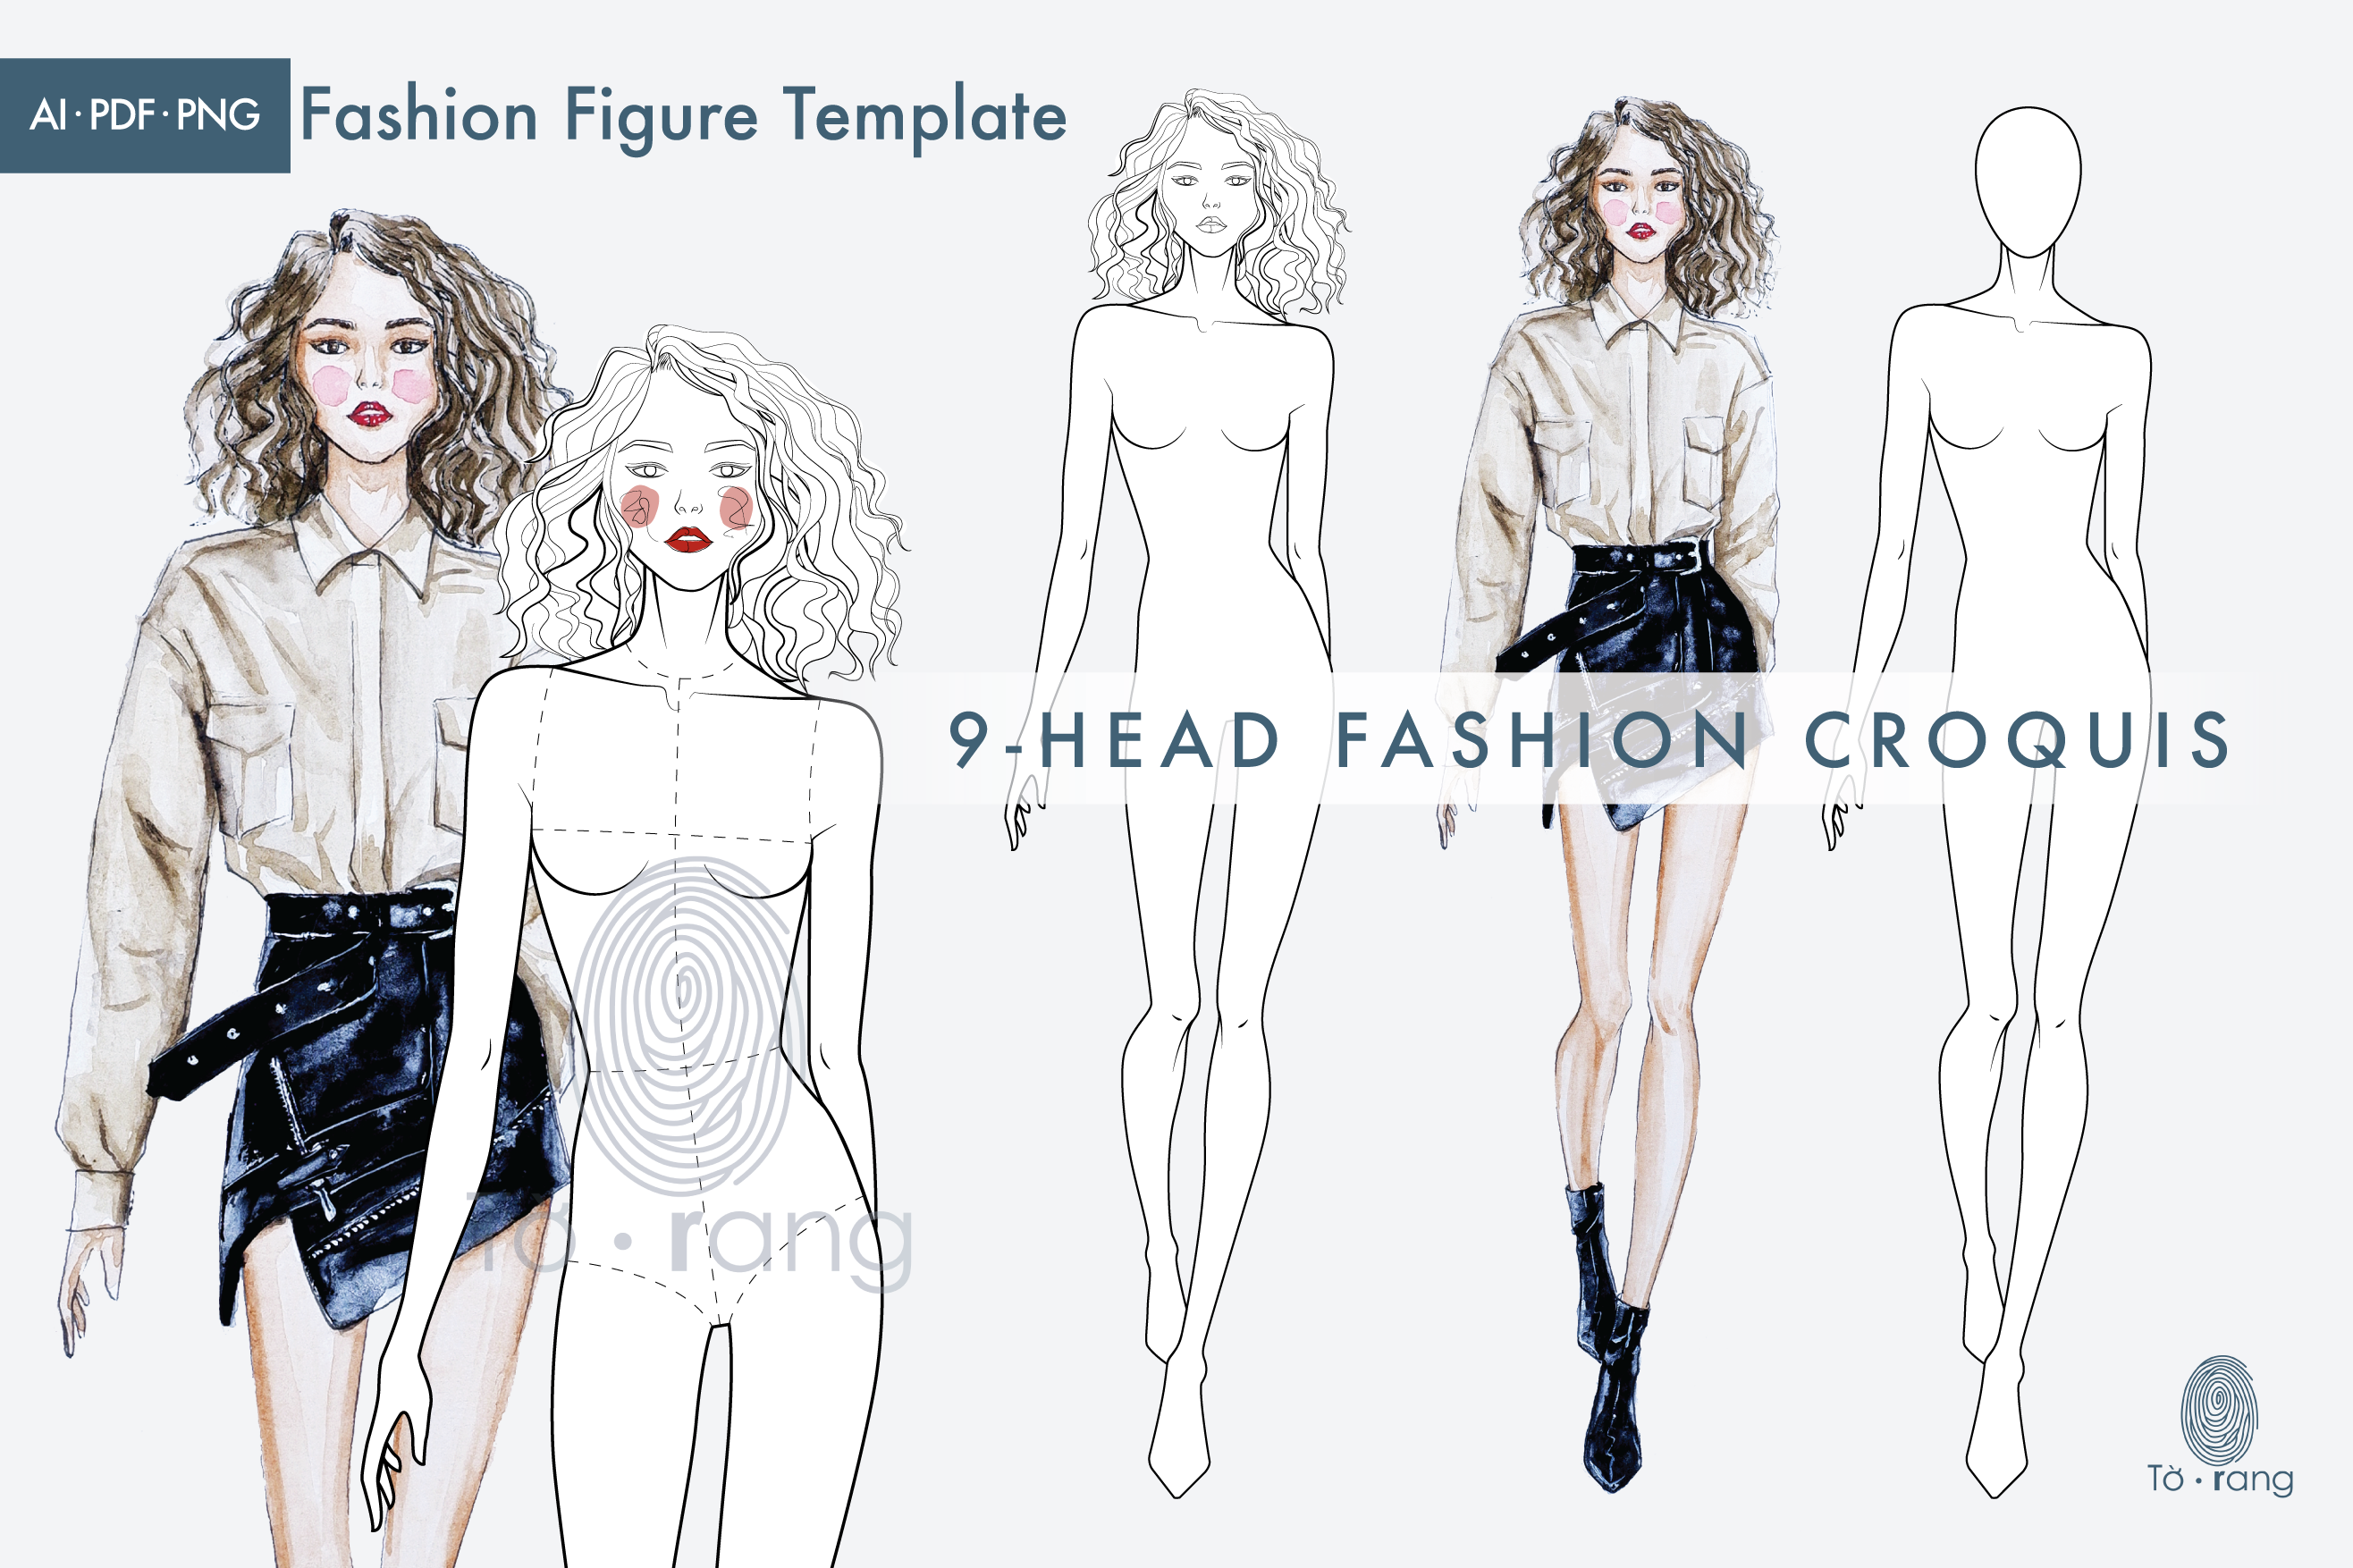 Female Fashion Figures: Step 1 of 4: Figuring Out the Pose & Proportions -  YouTube